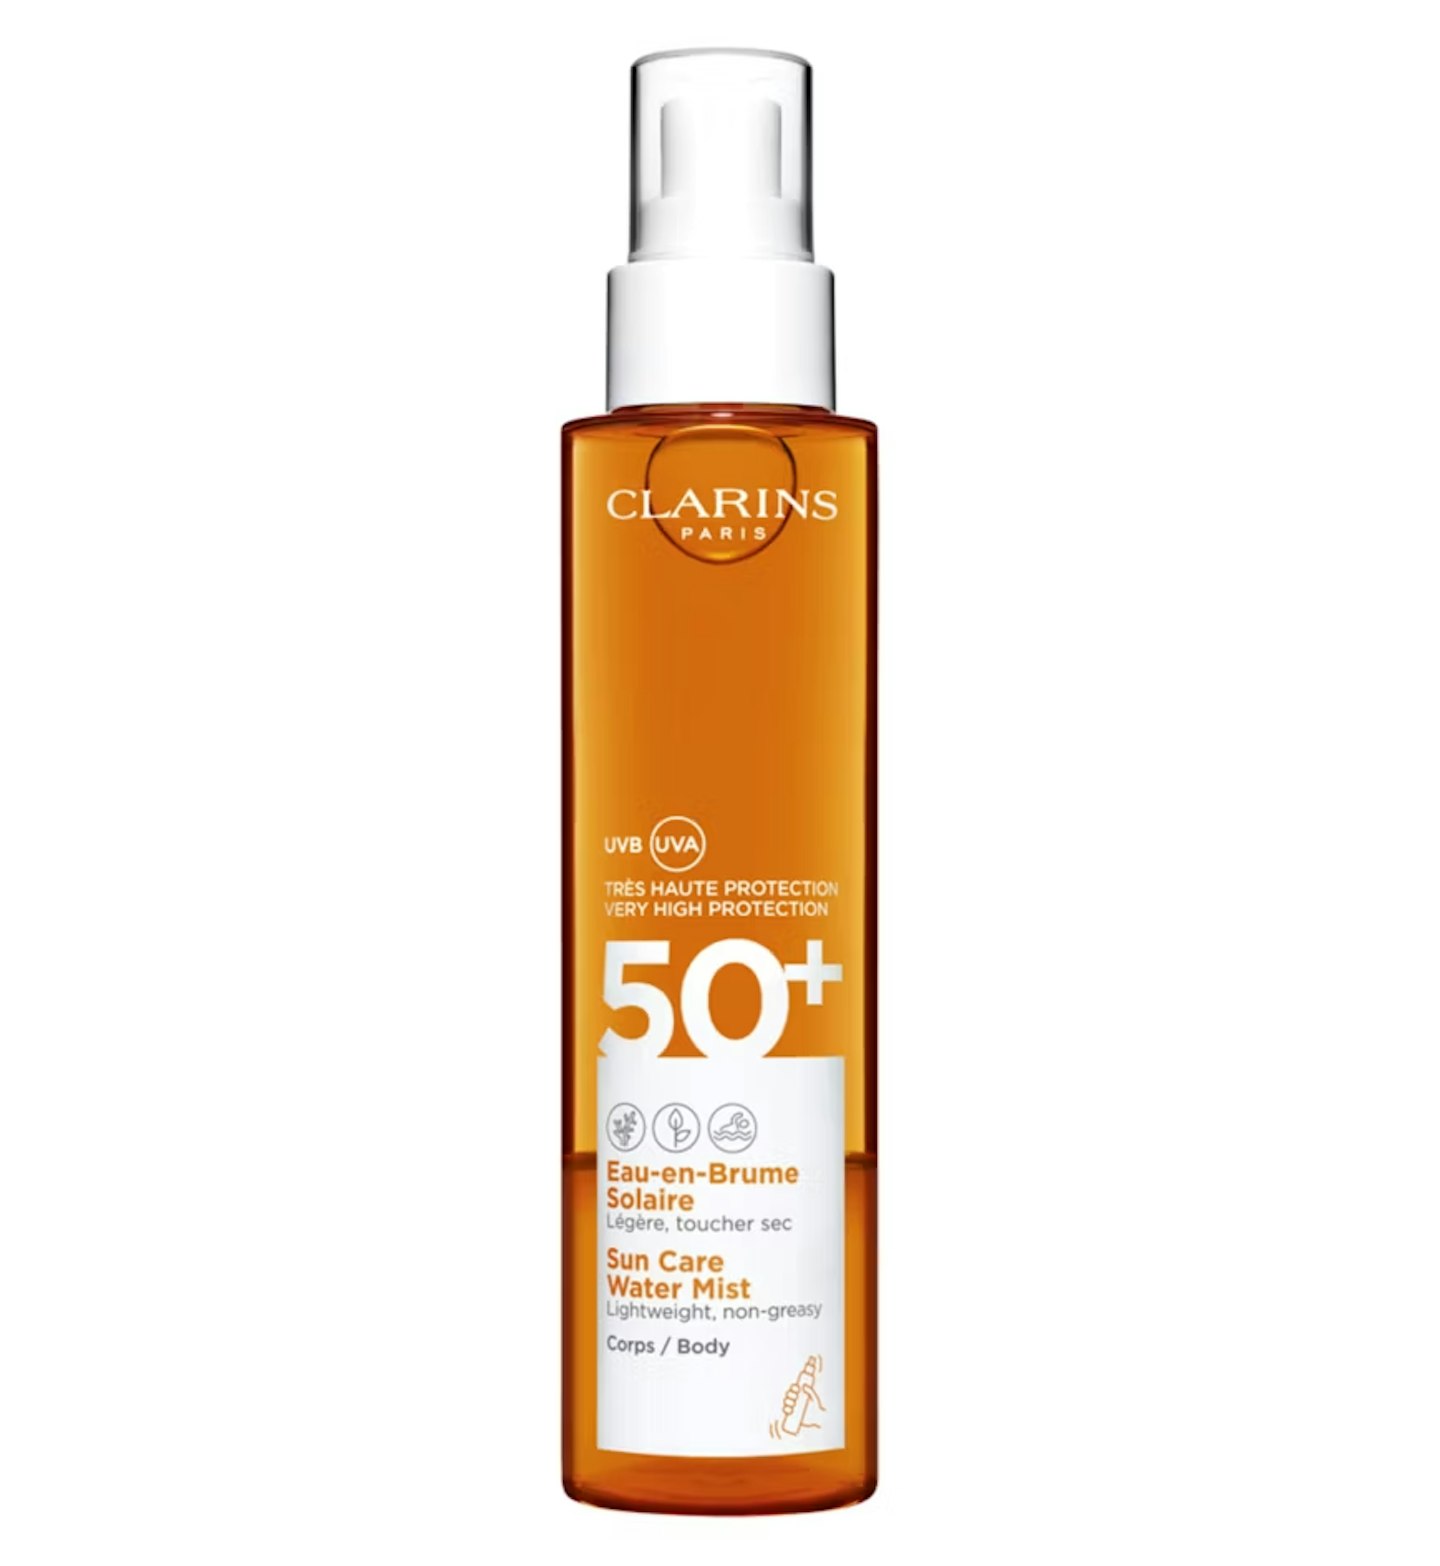  Clarins Sun Care Water Mist SPF50+ for Body